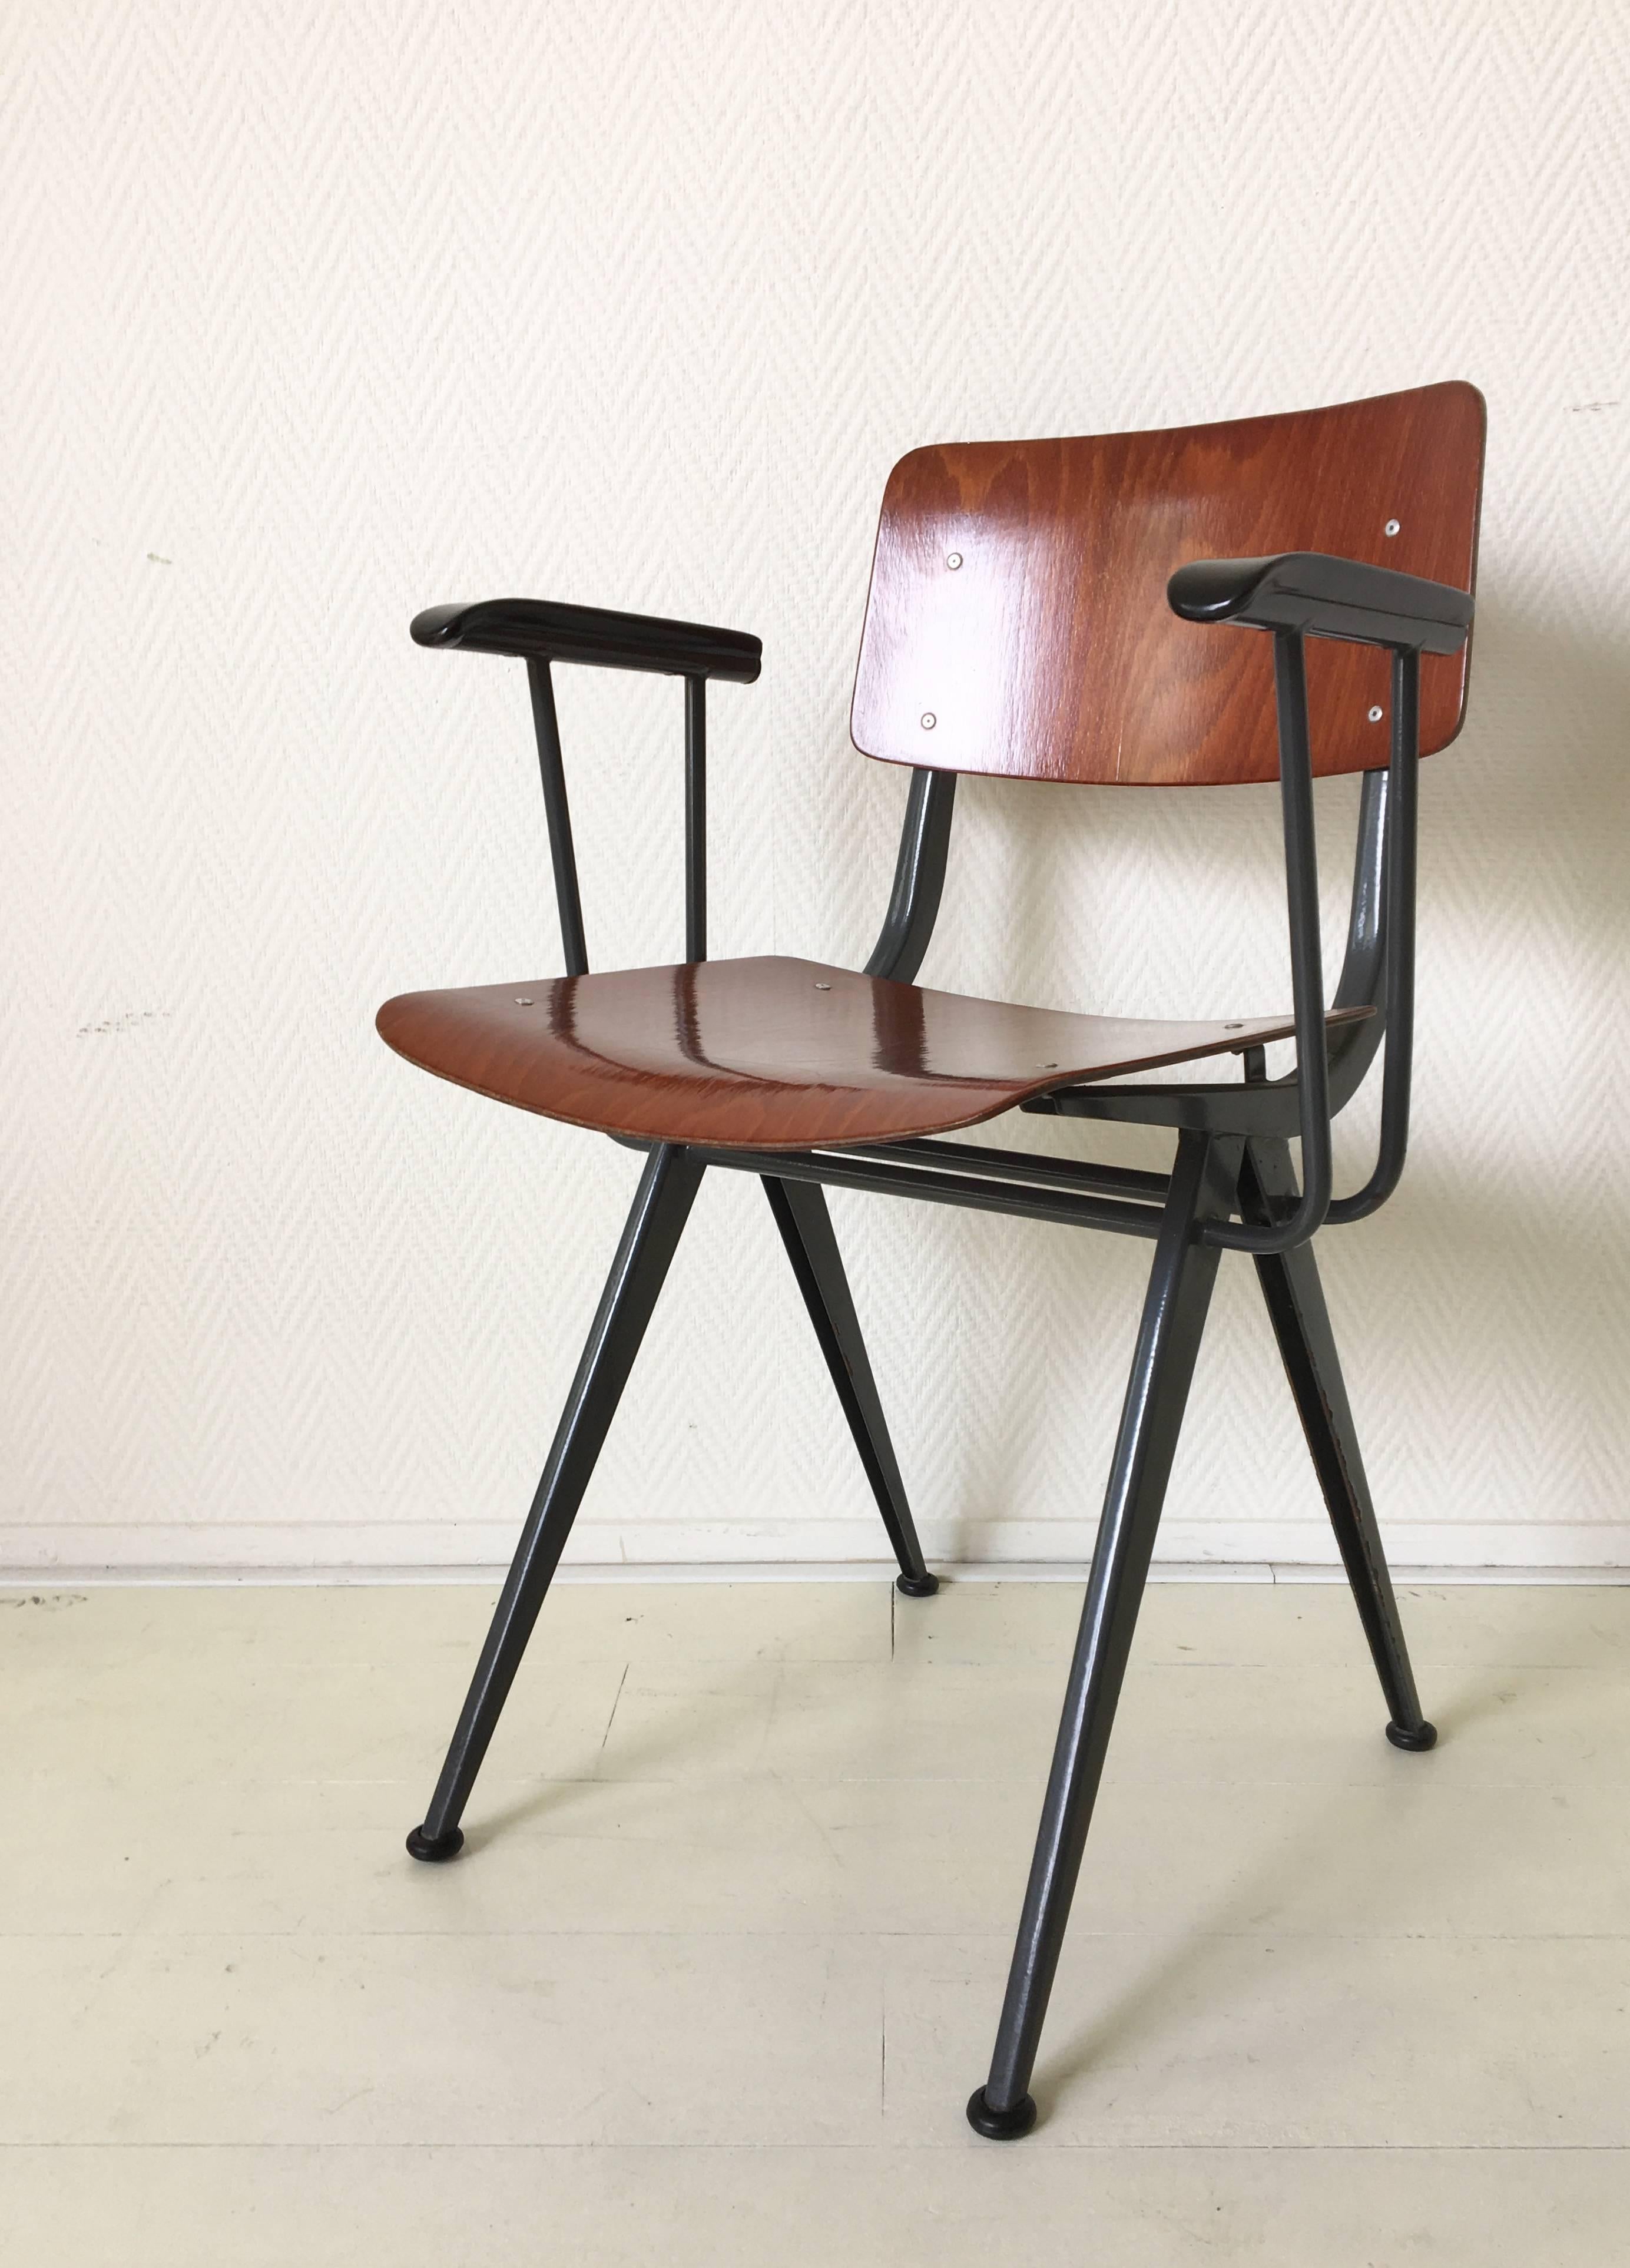 Minimalist Midcentury Prouvé Inspired Industrial Armchair Attributed to Friso Kramer For Sale